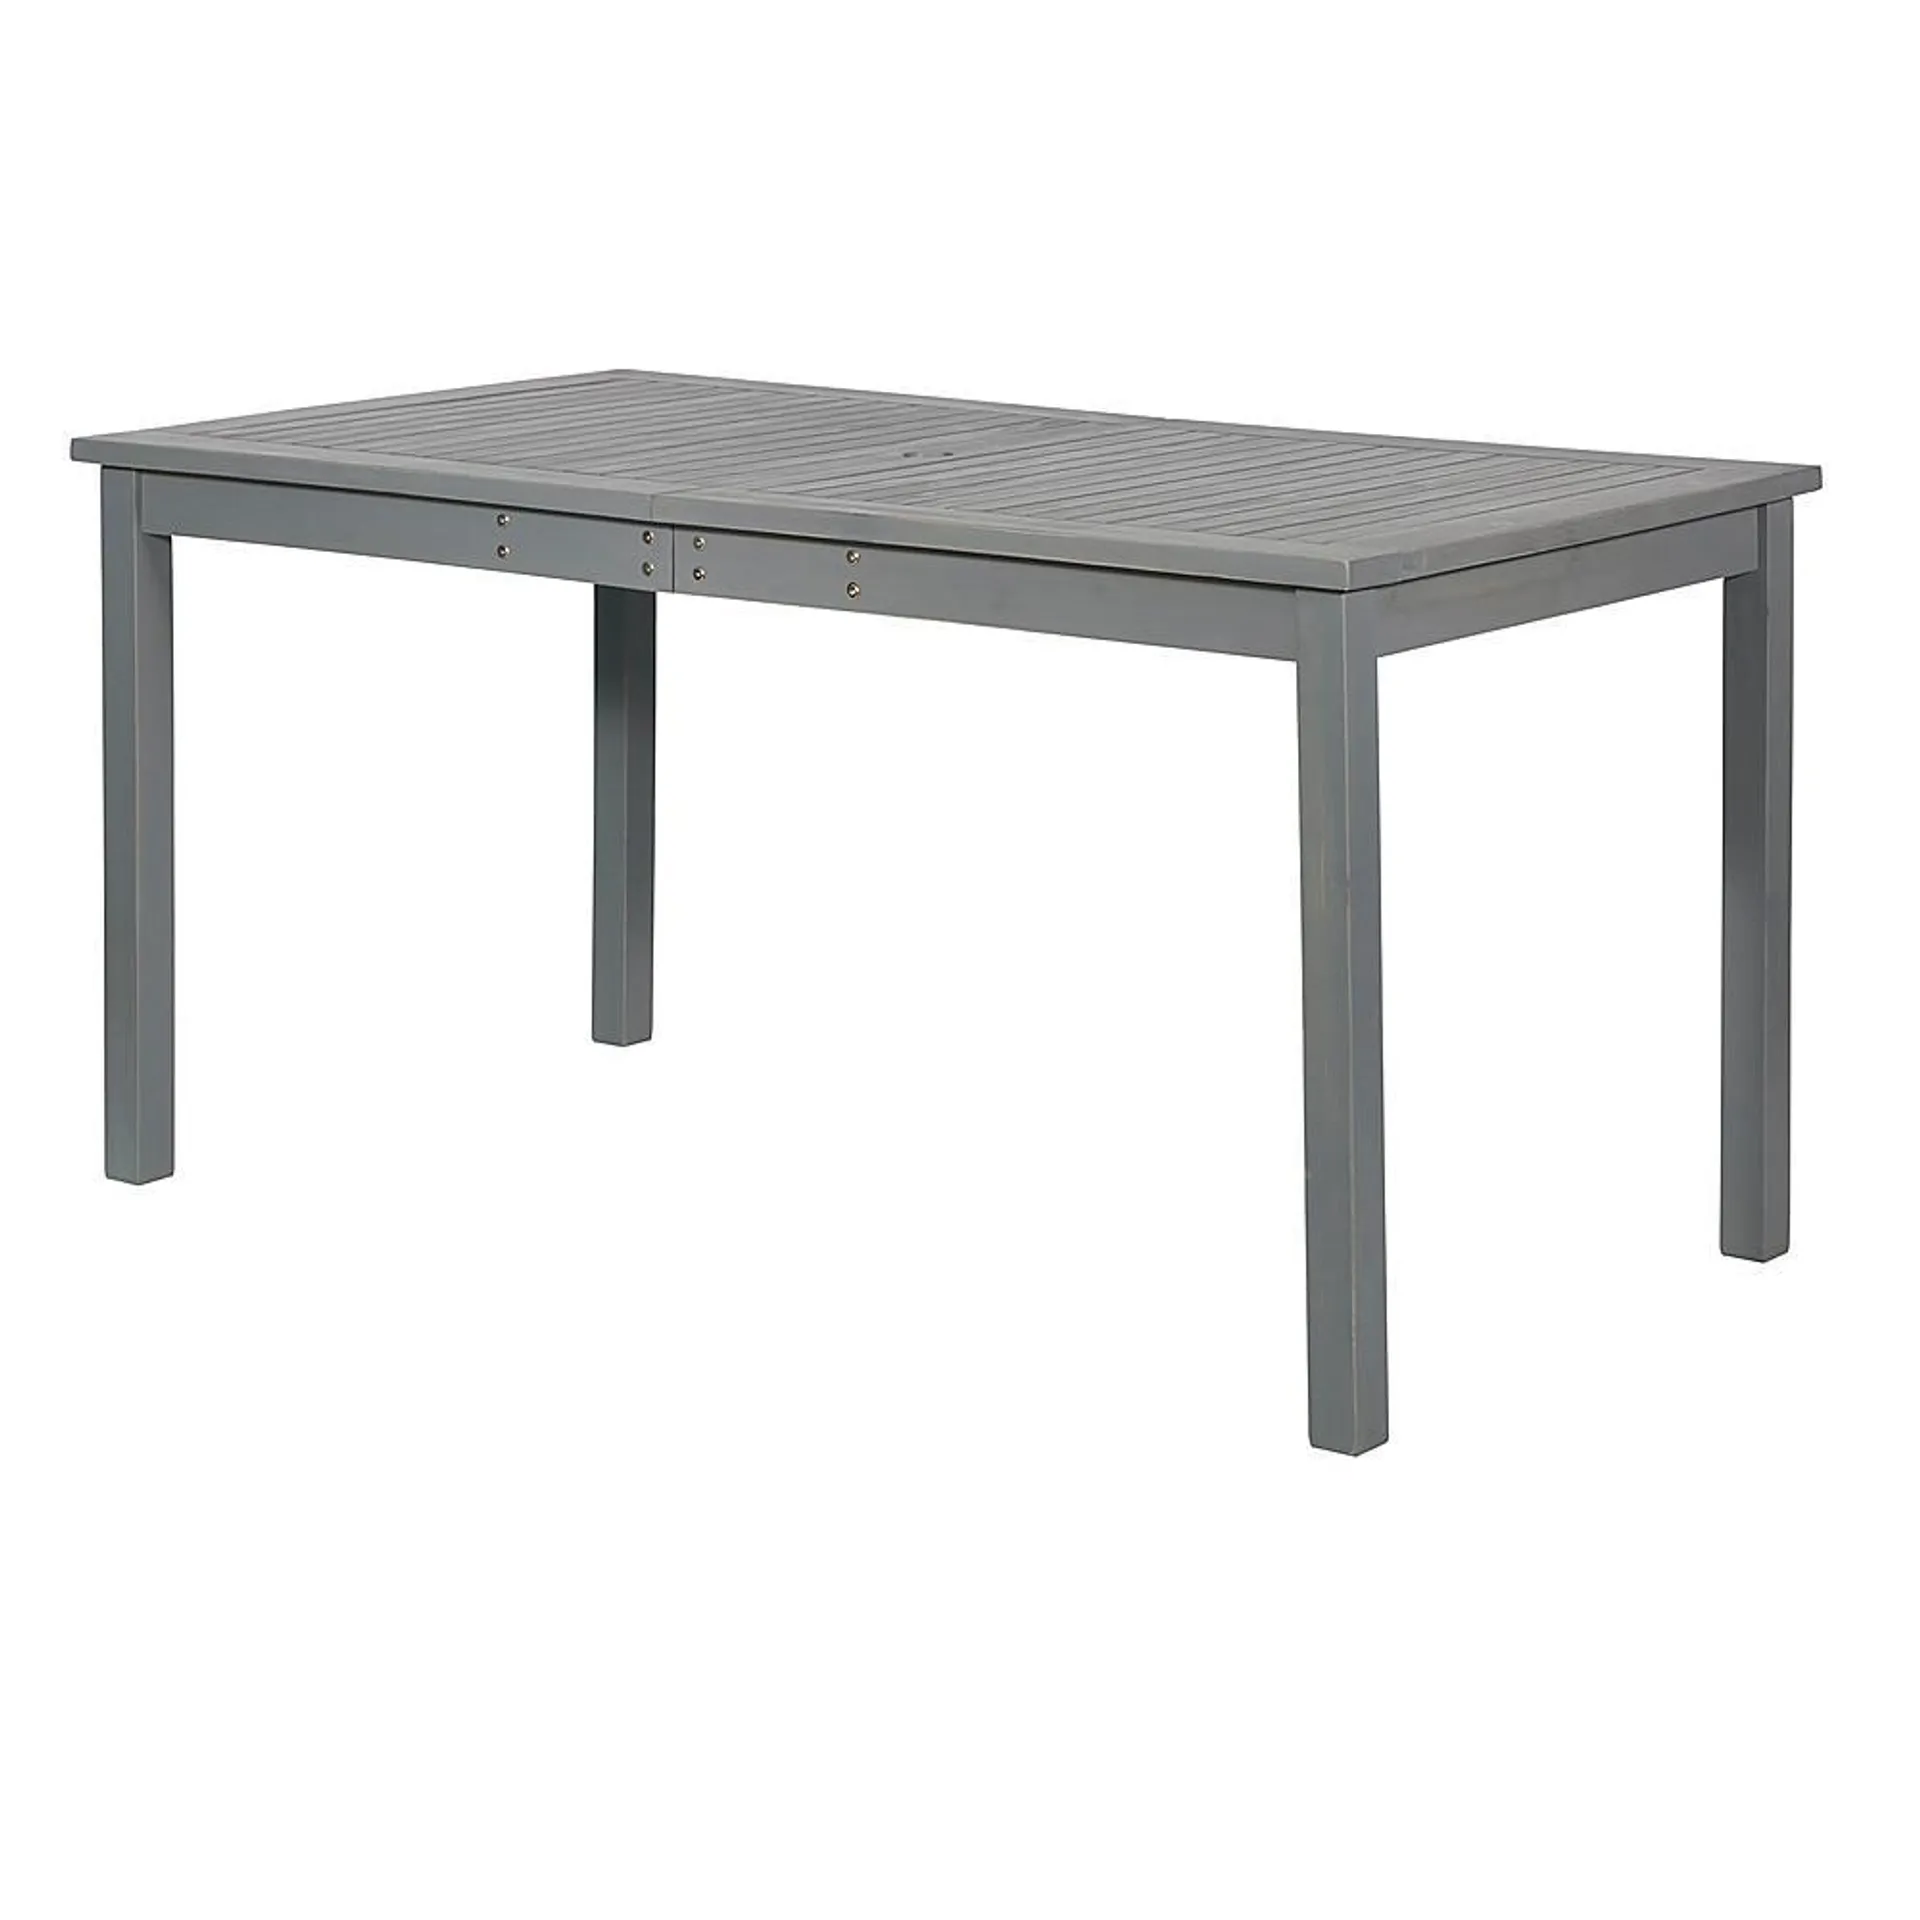 Walker Edison - Everest Acacia Wood Outdoor Dining Table - Gray Wash